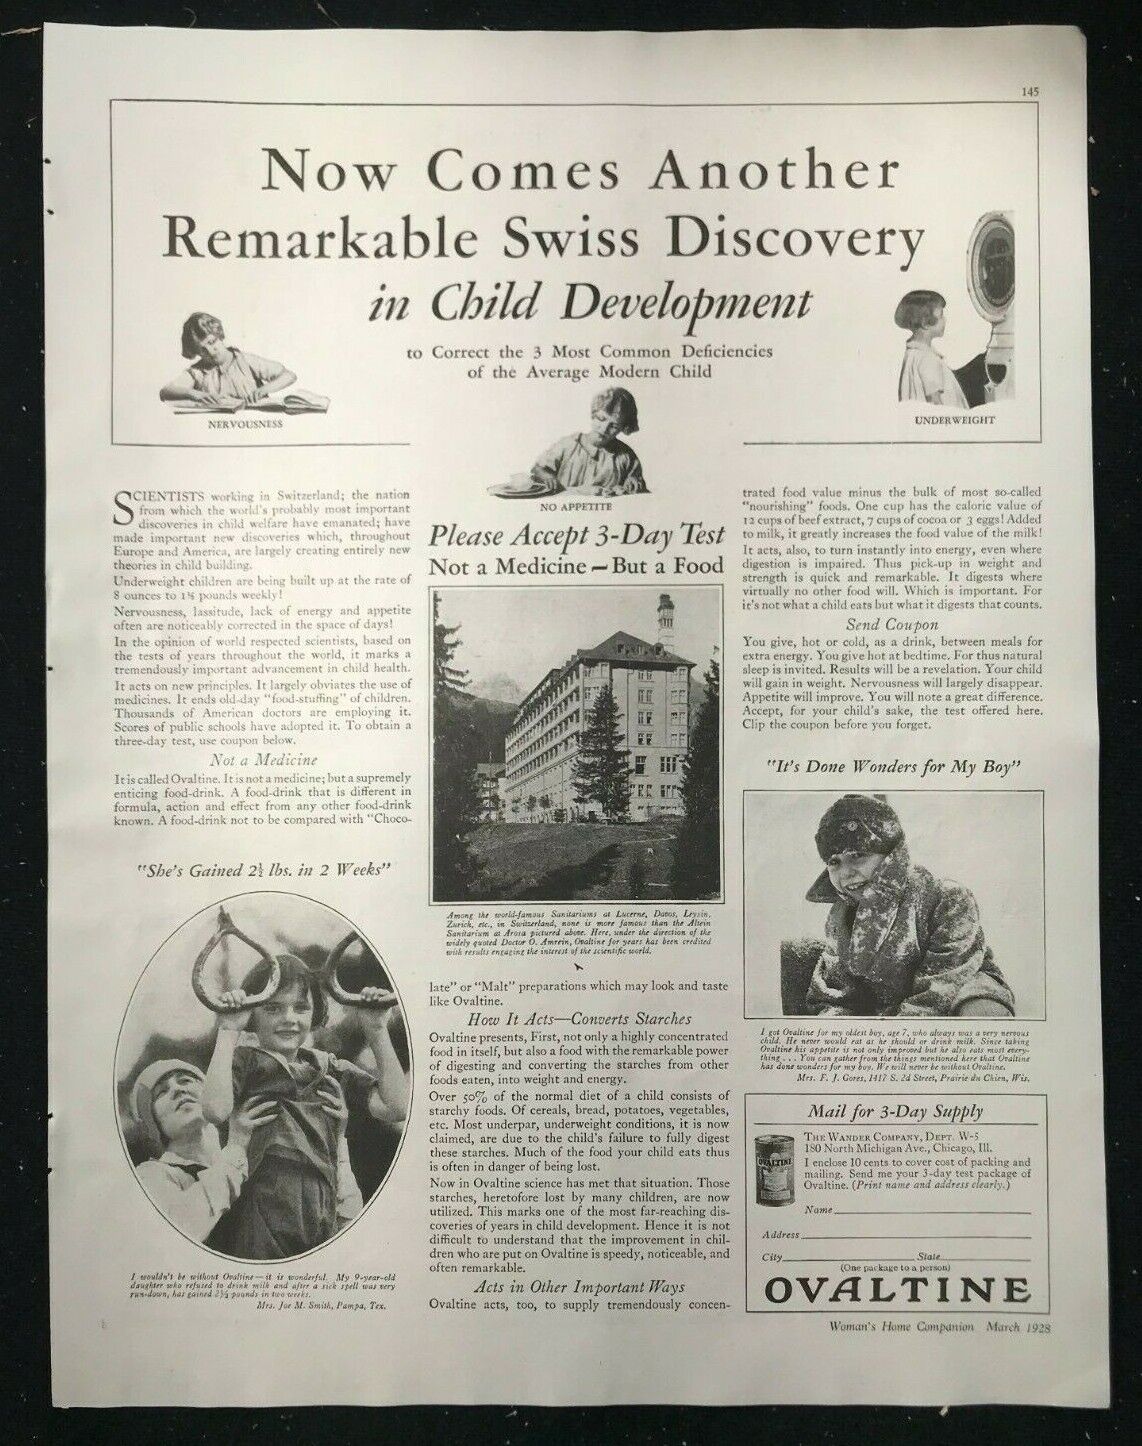 OVALTINE Print Ad -- Another Remarkable Swiss Discovery -- 1928 -- 10 x 13